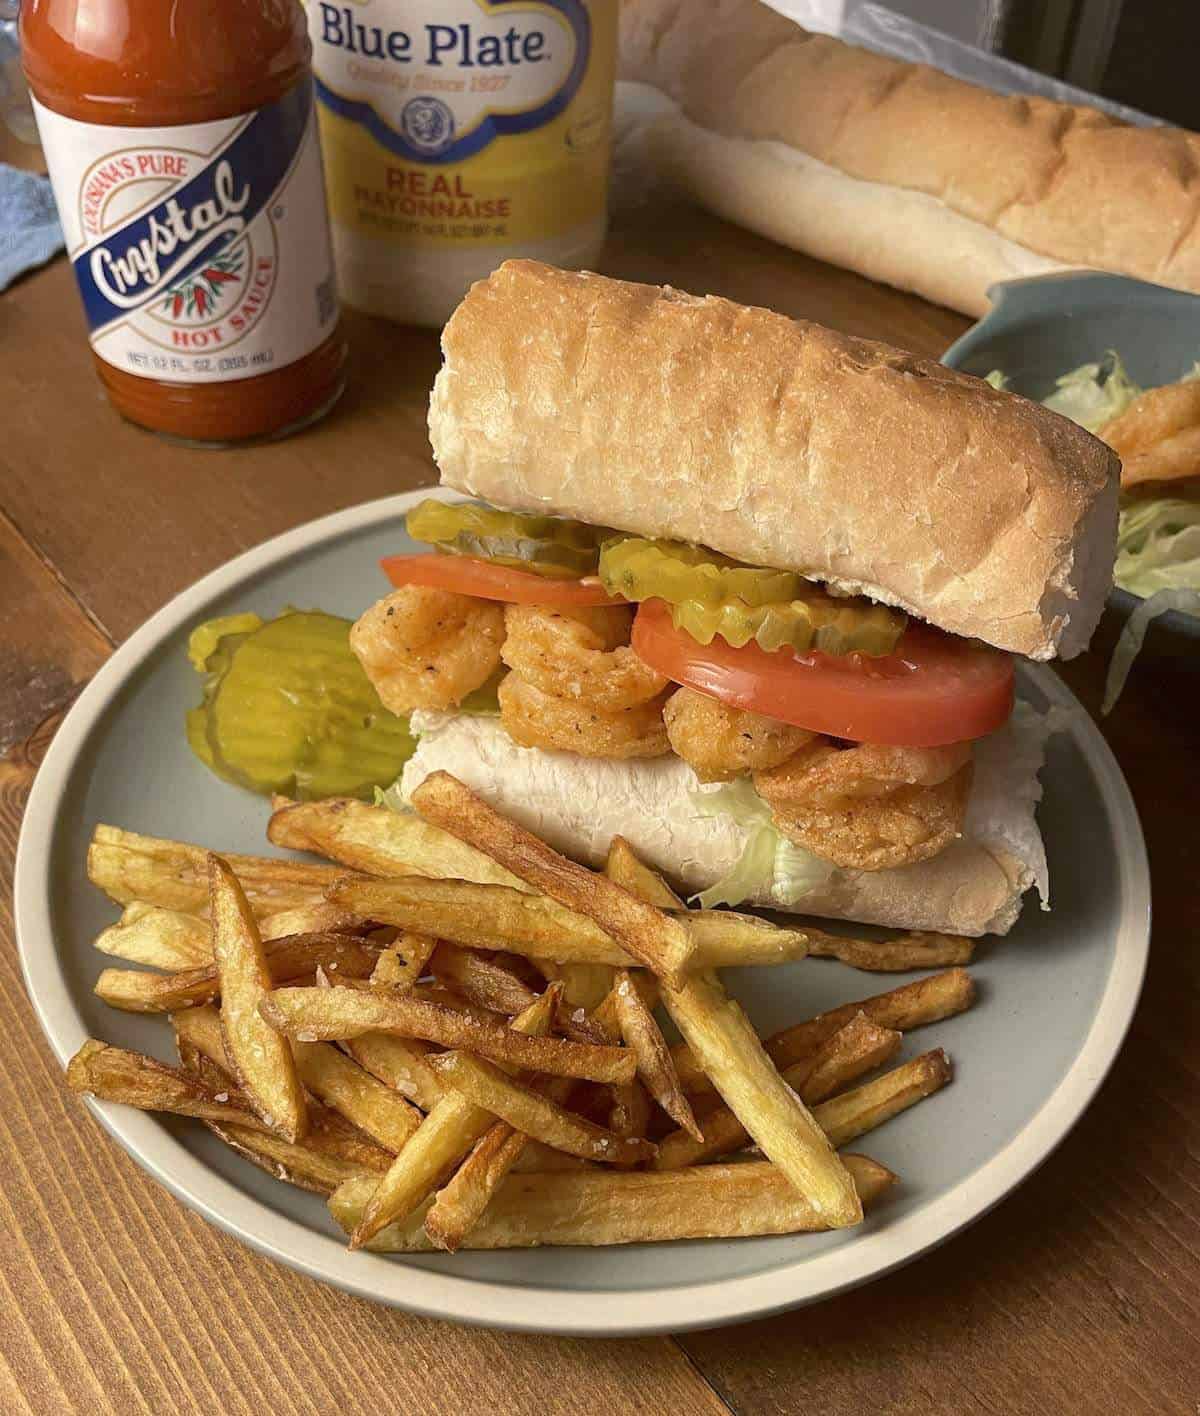 A fully dressed crispy fried shrimp po boy on a blue plate with french fries, and hot sauce.